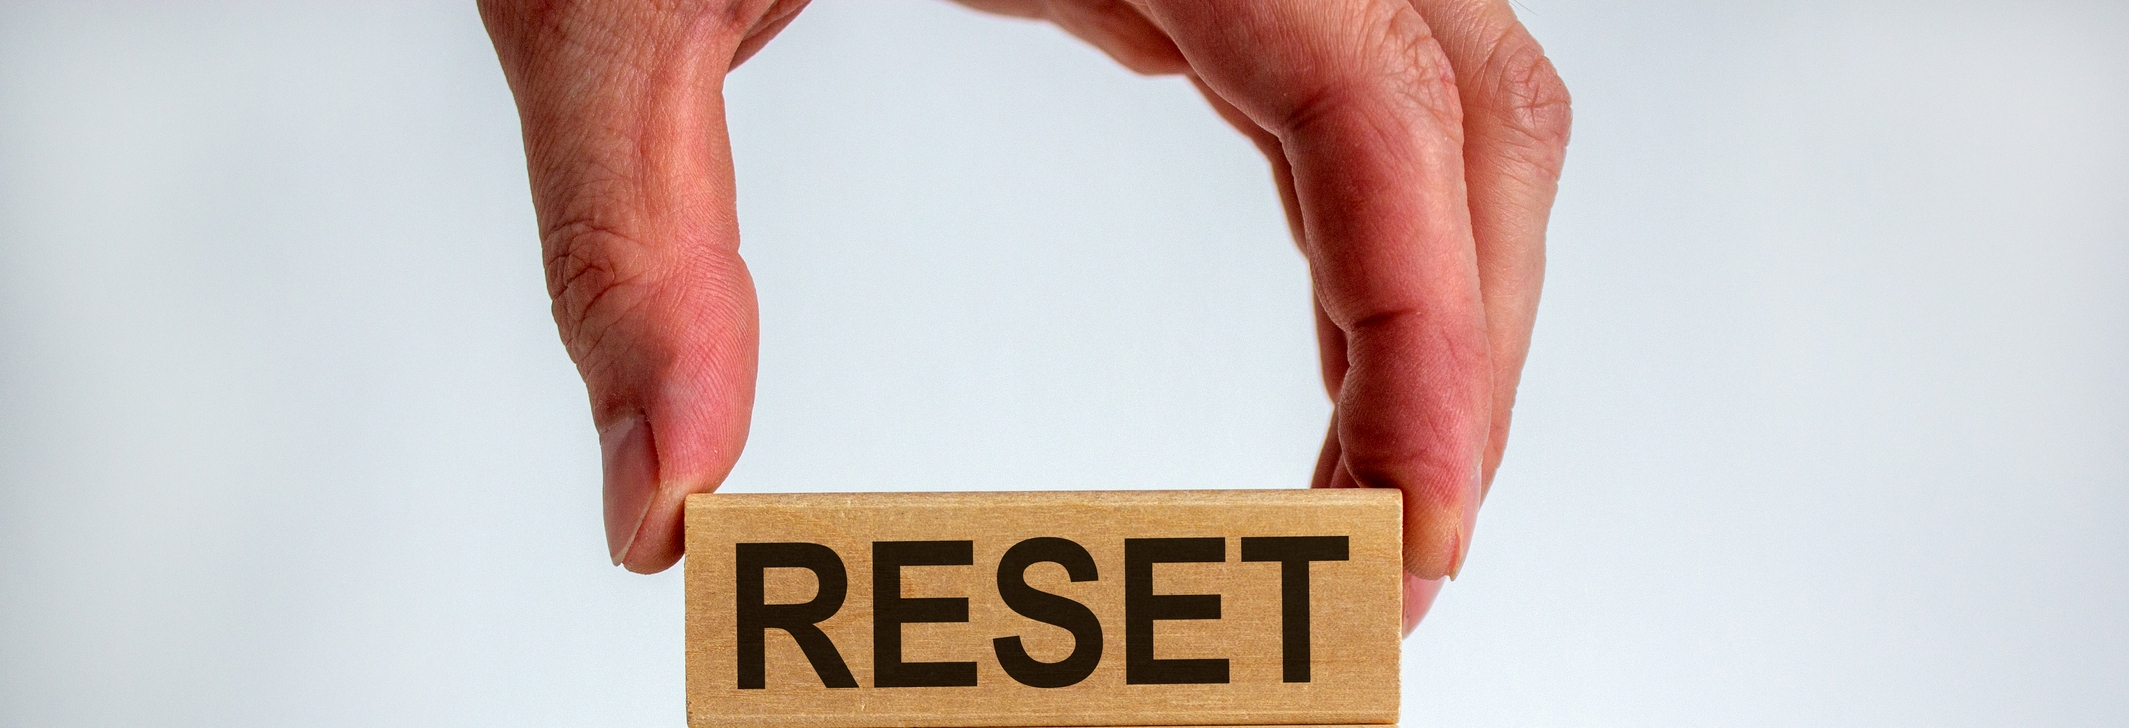 Reset HR-Business Partnerships to Thrive Through Change